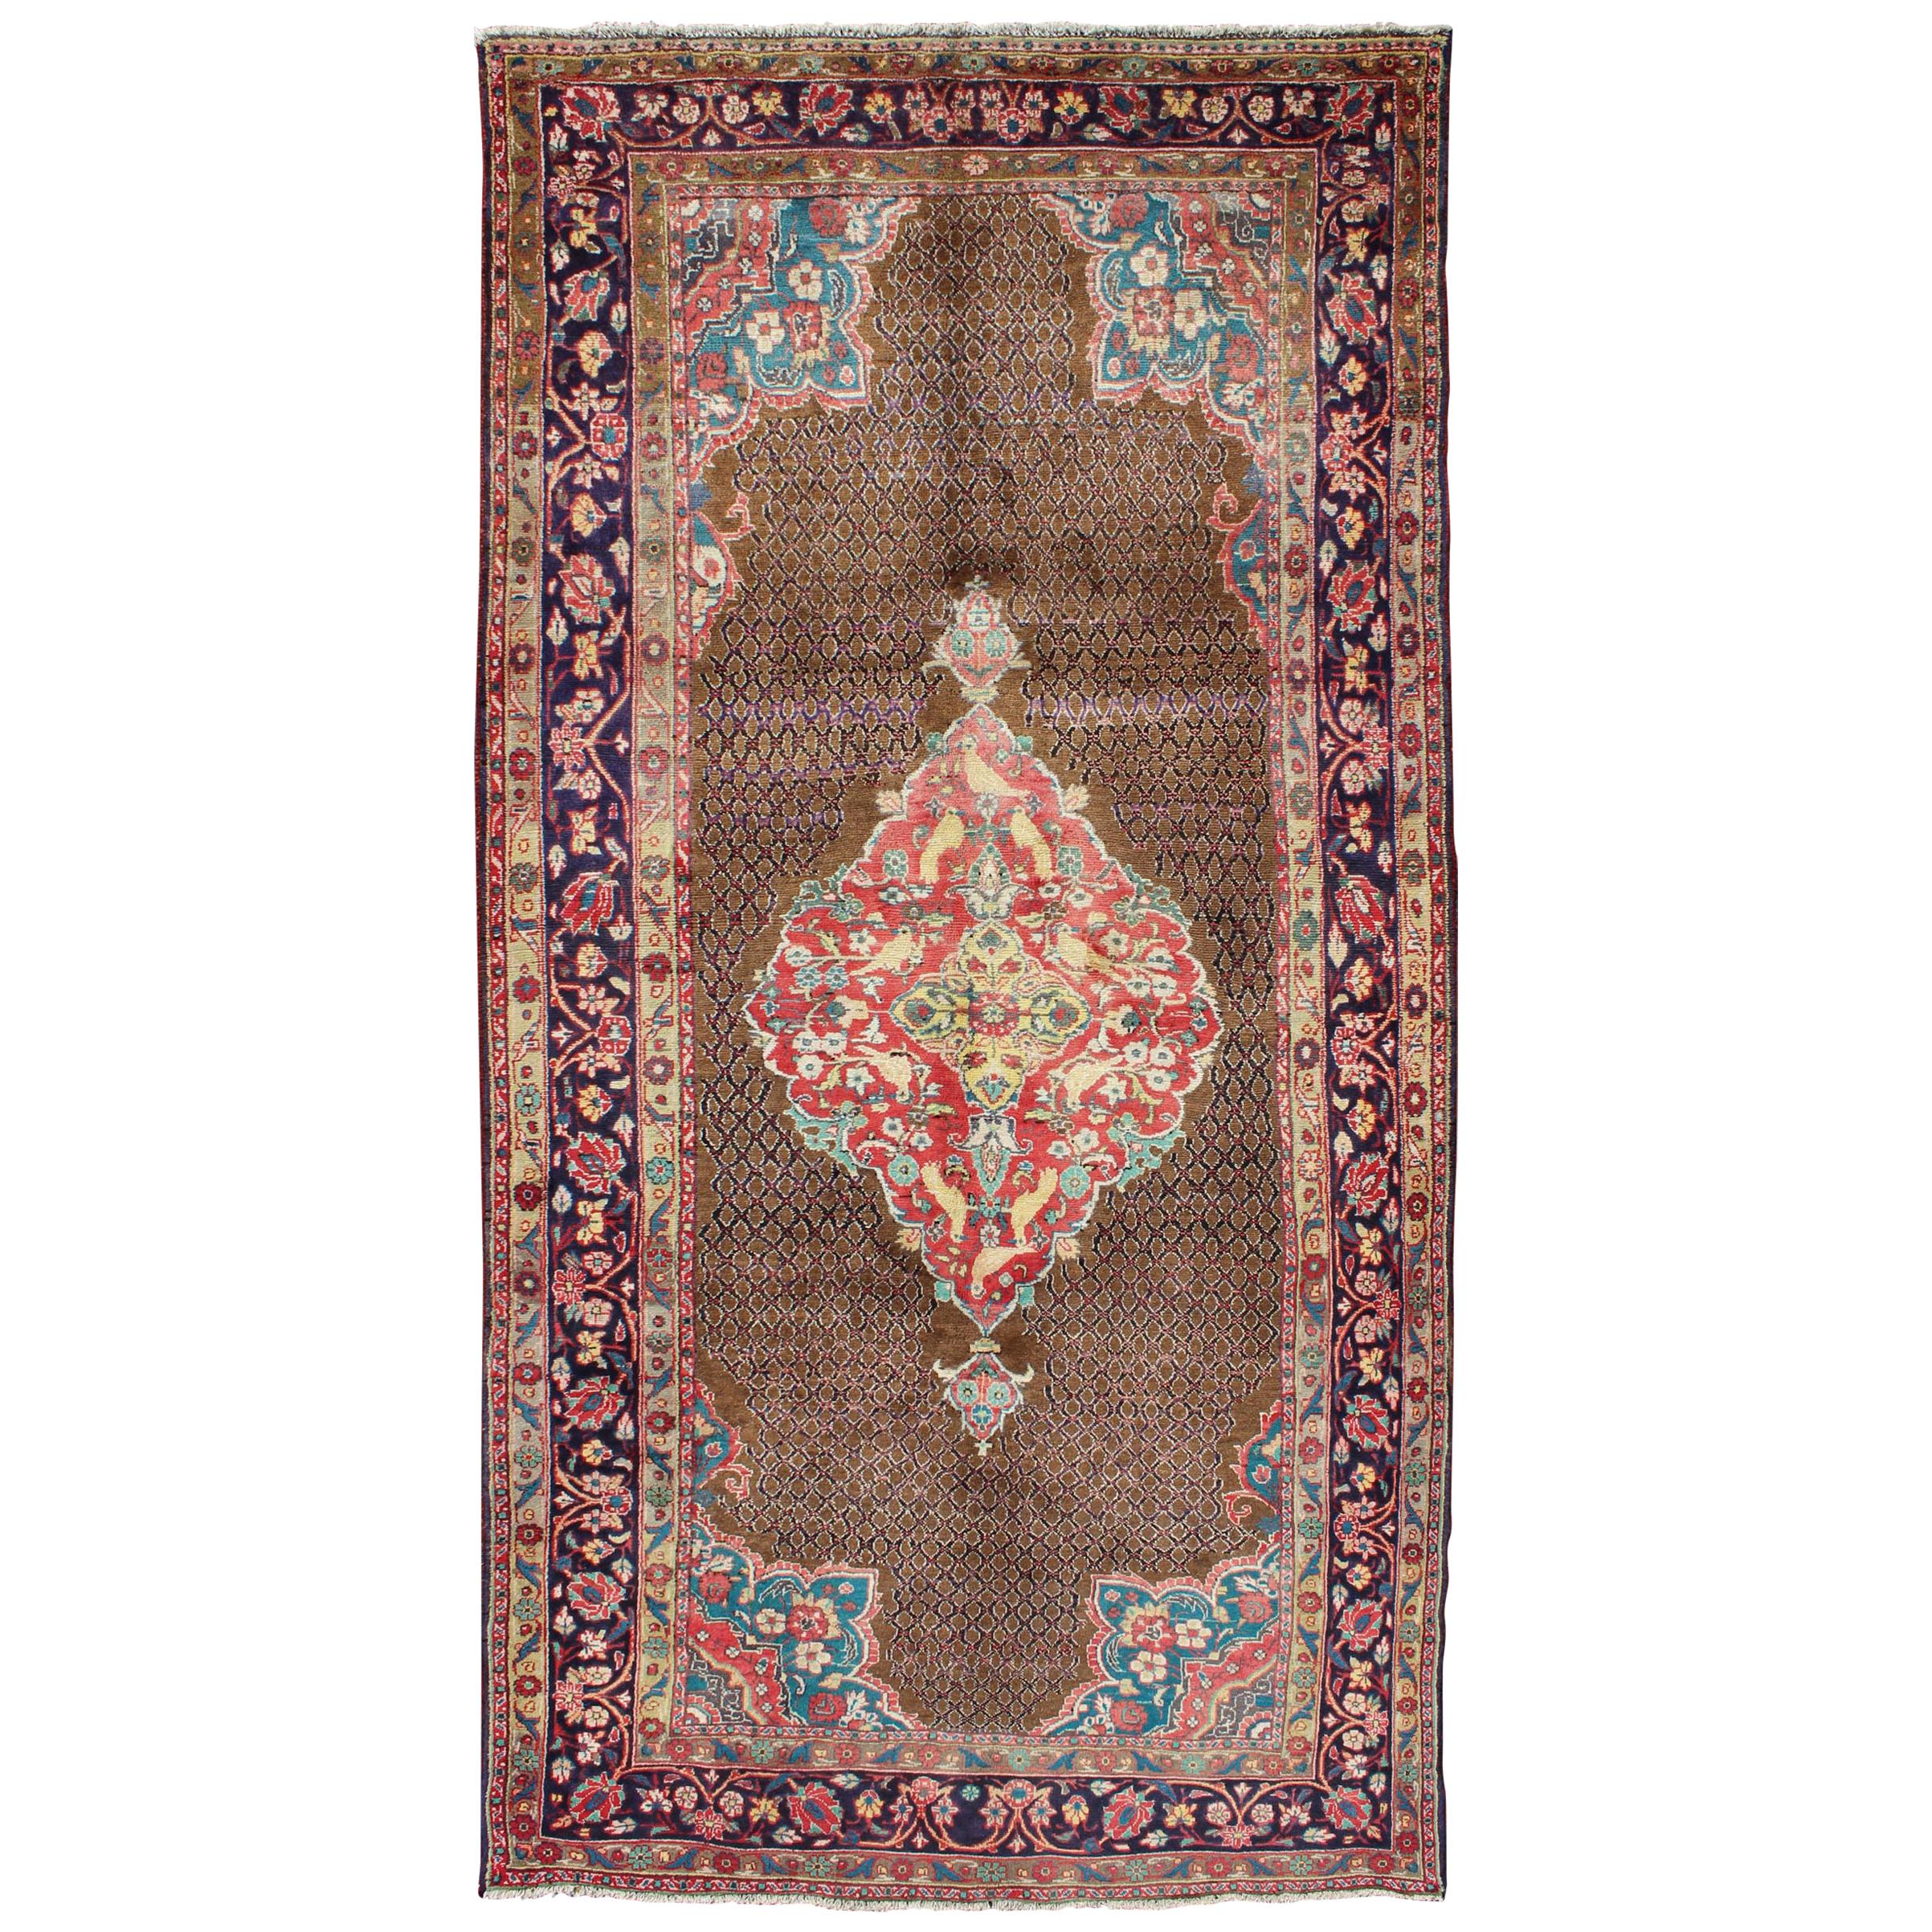 Camel Hair Vintage Persian Serab Rug in Brown, Red, Turquoise and Dark Blue For Sale